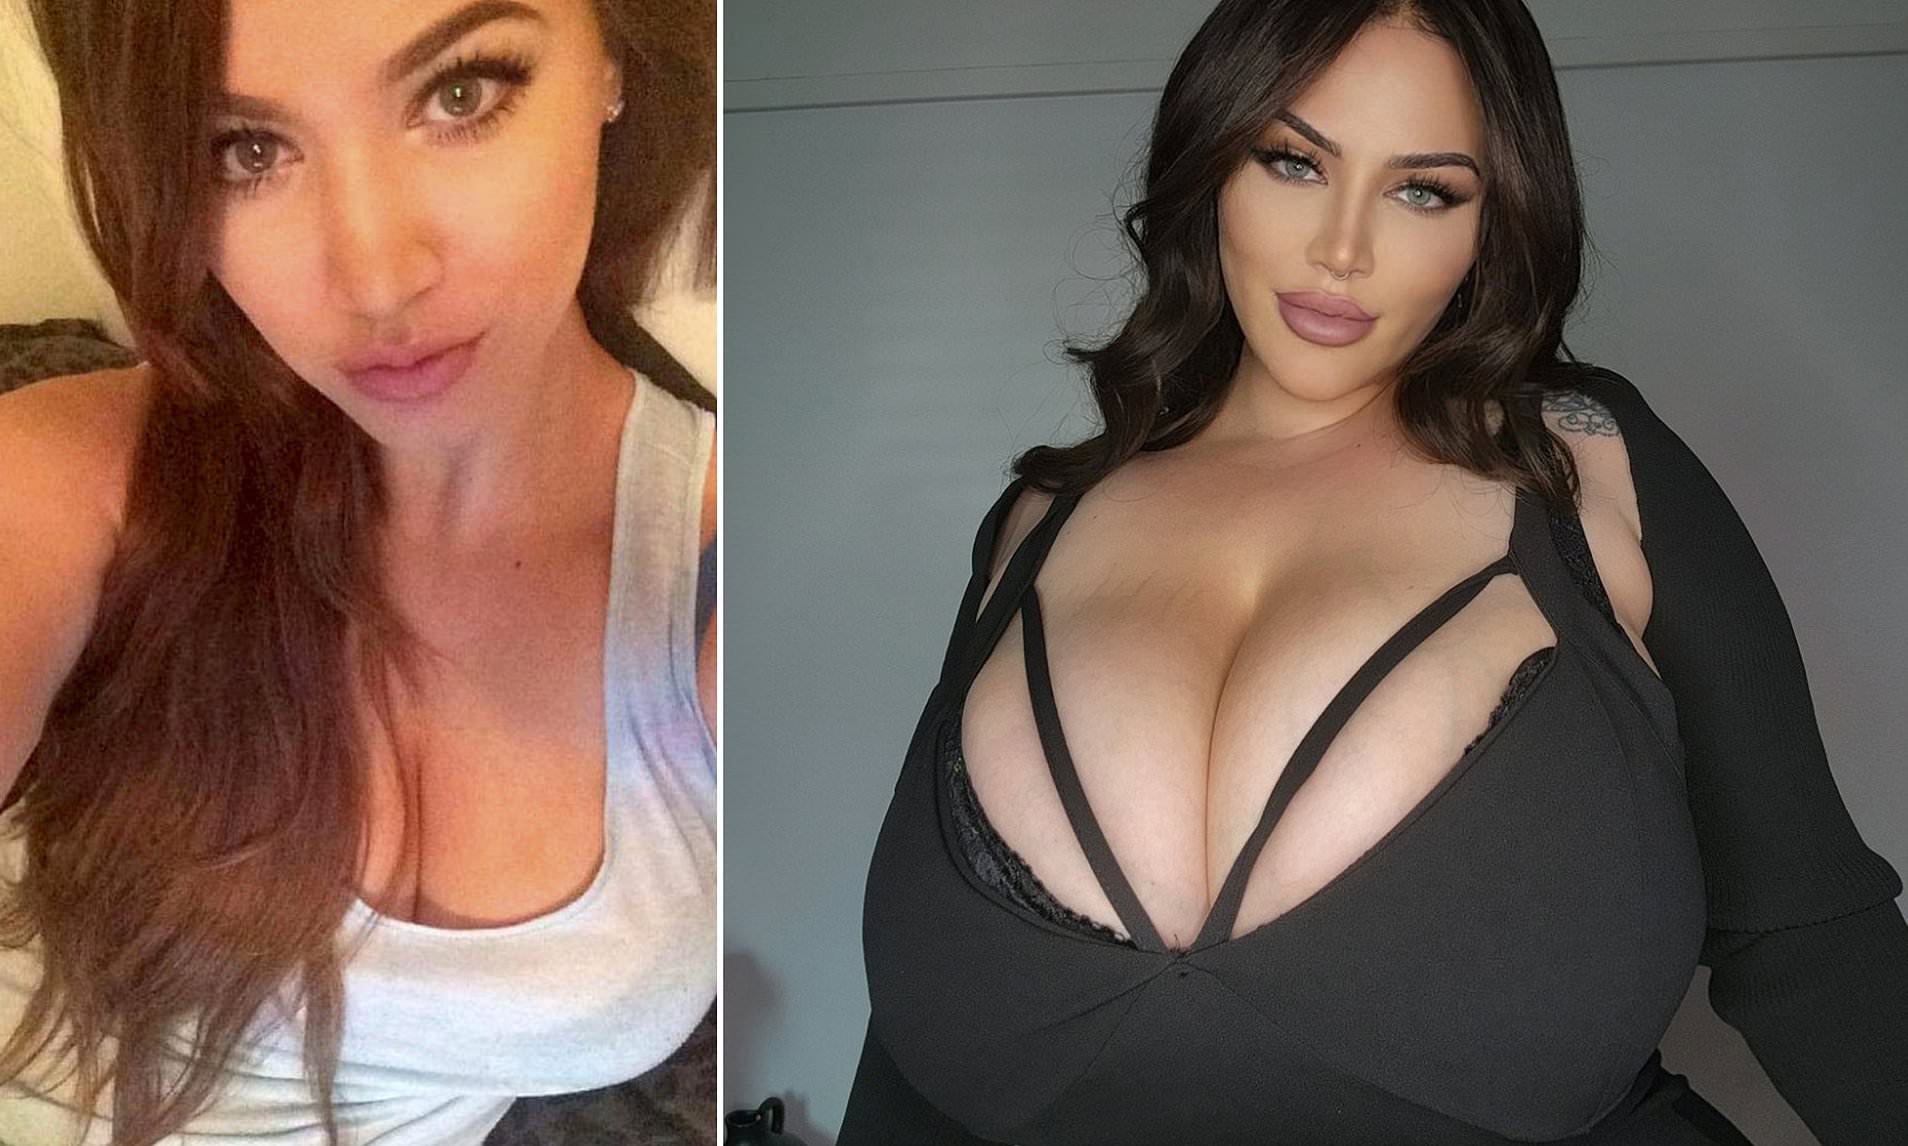 adam cardenas recommends my mom huge tits pic